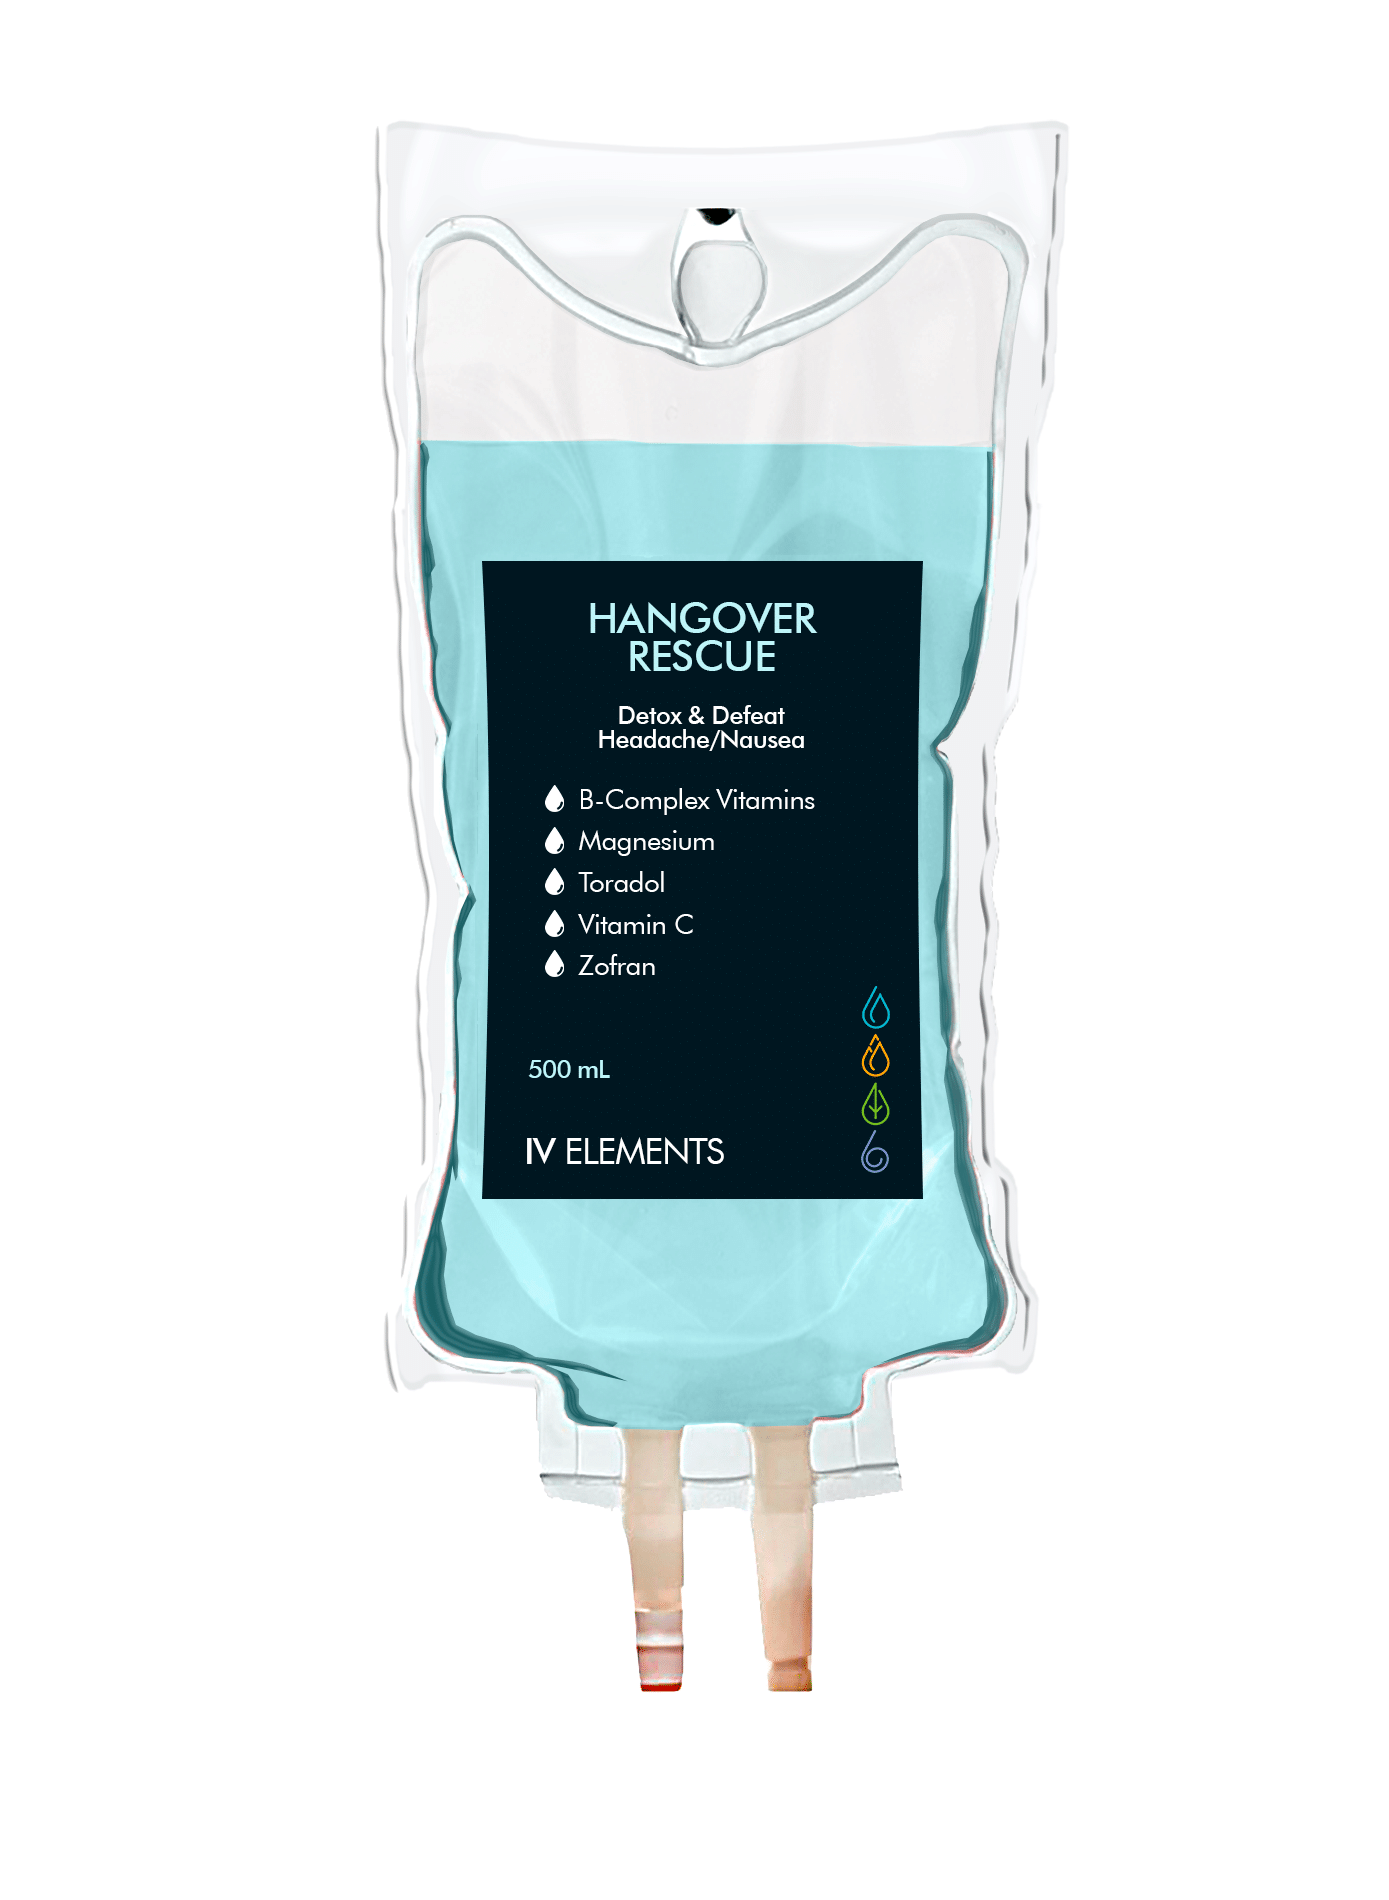 Hangover Rescue/Stomach Bug IV drip bag from IV Elements: Detox & defeat headache/nausea